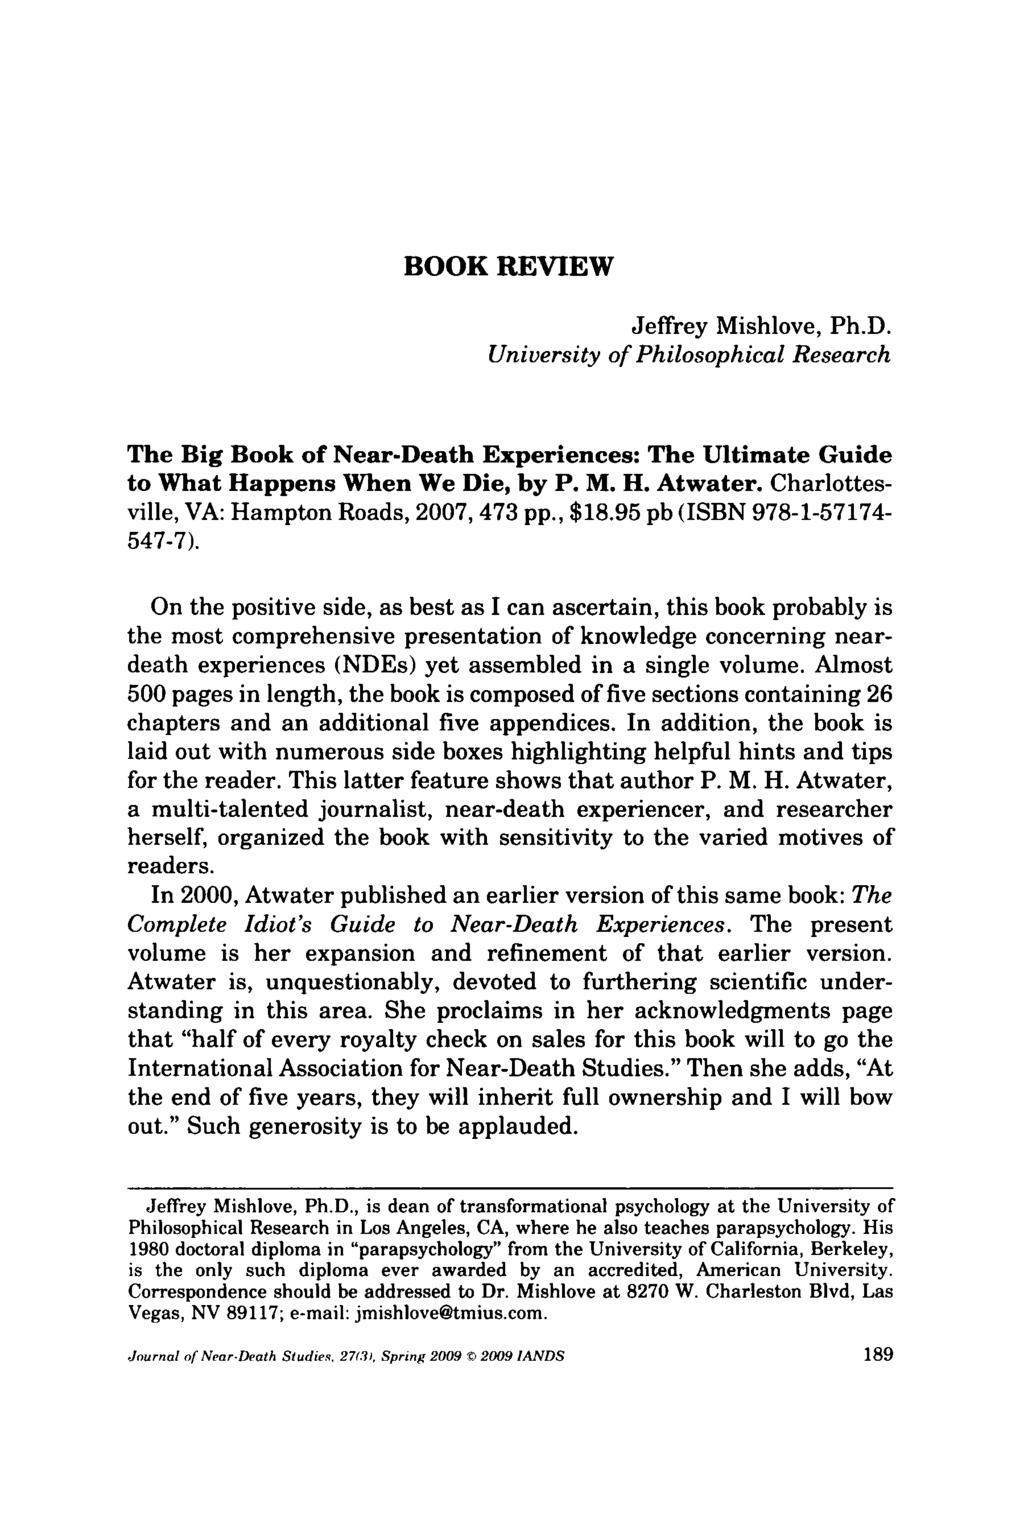 BOOK REVIEW Jeffrey Mishlove, Ph.D. University of Philosophical Research The Big Book of Near-Death Experiences: The Ultimate Guide to What Happens When We Die, by P. M. H. Atwater.